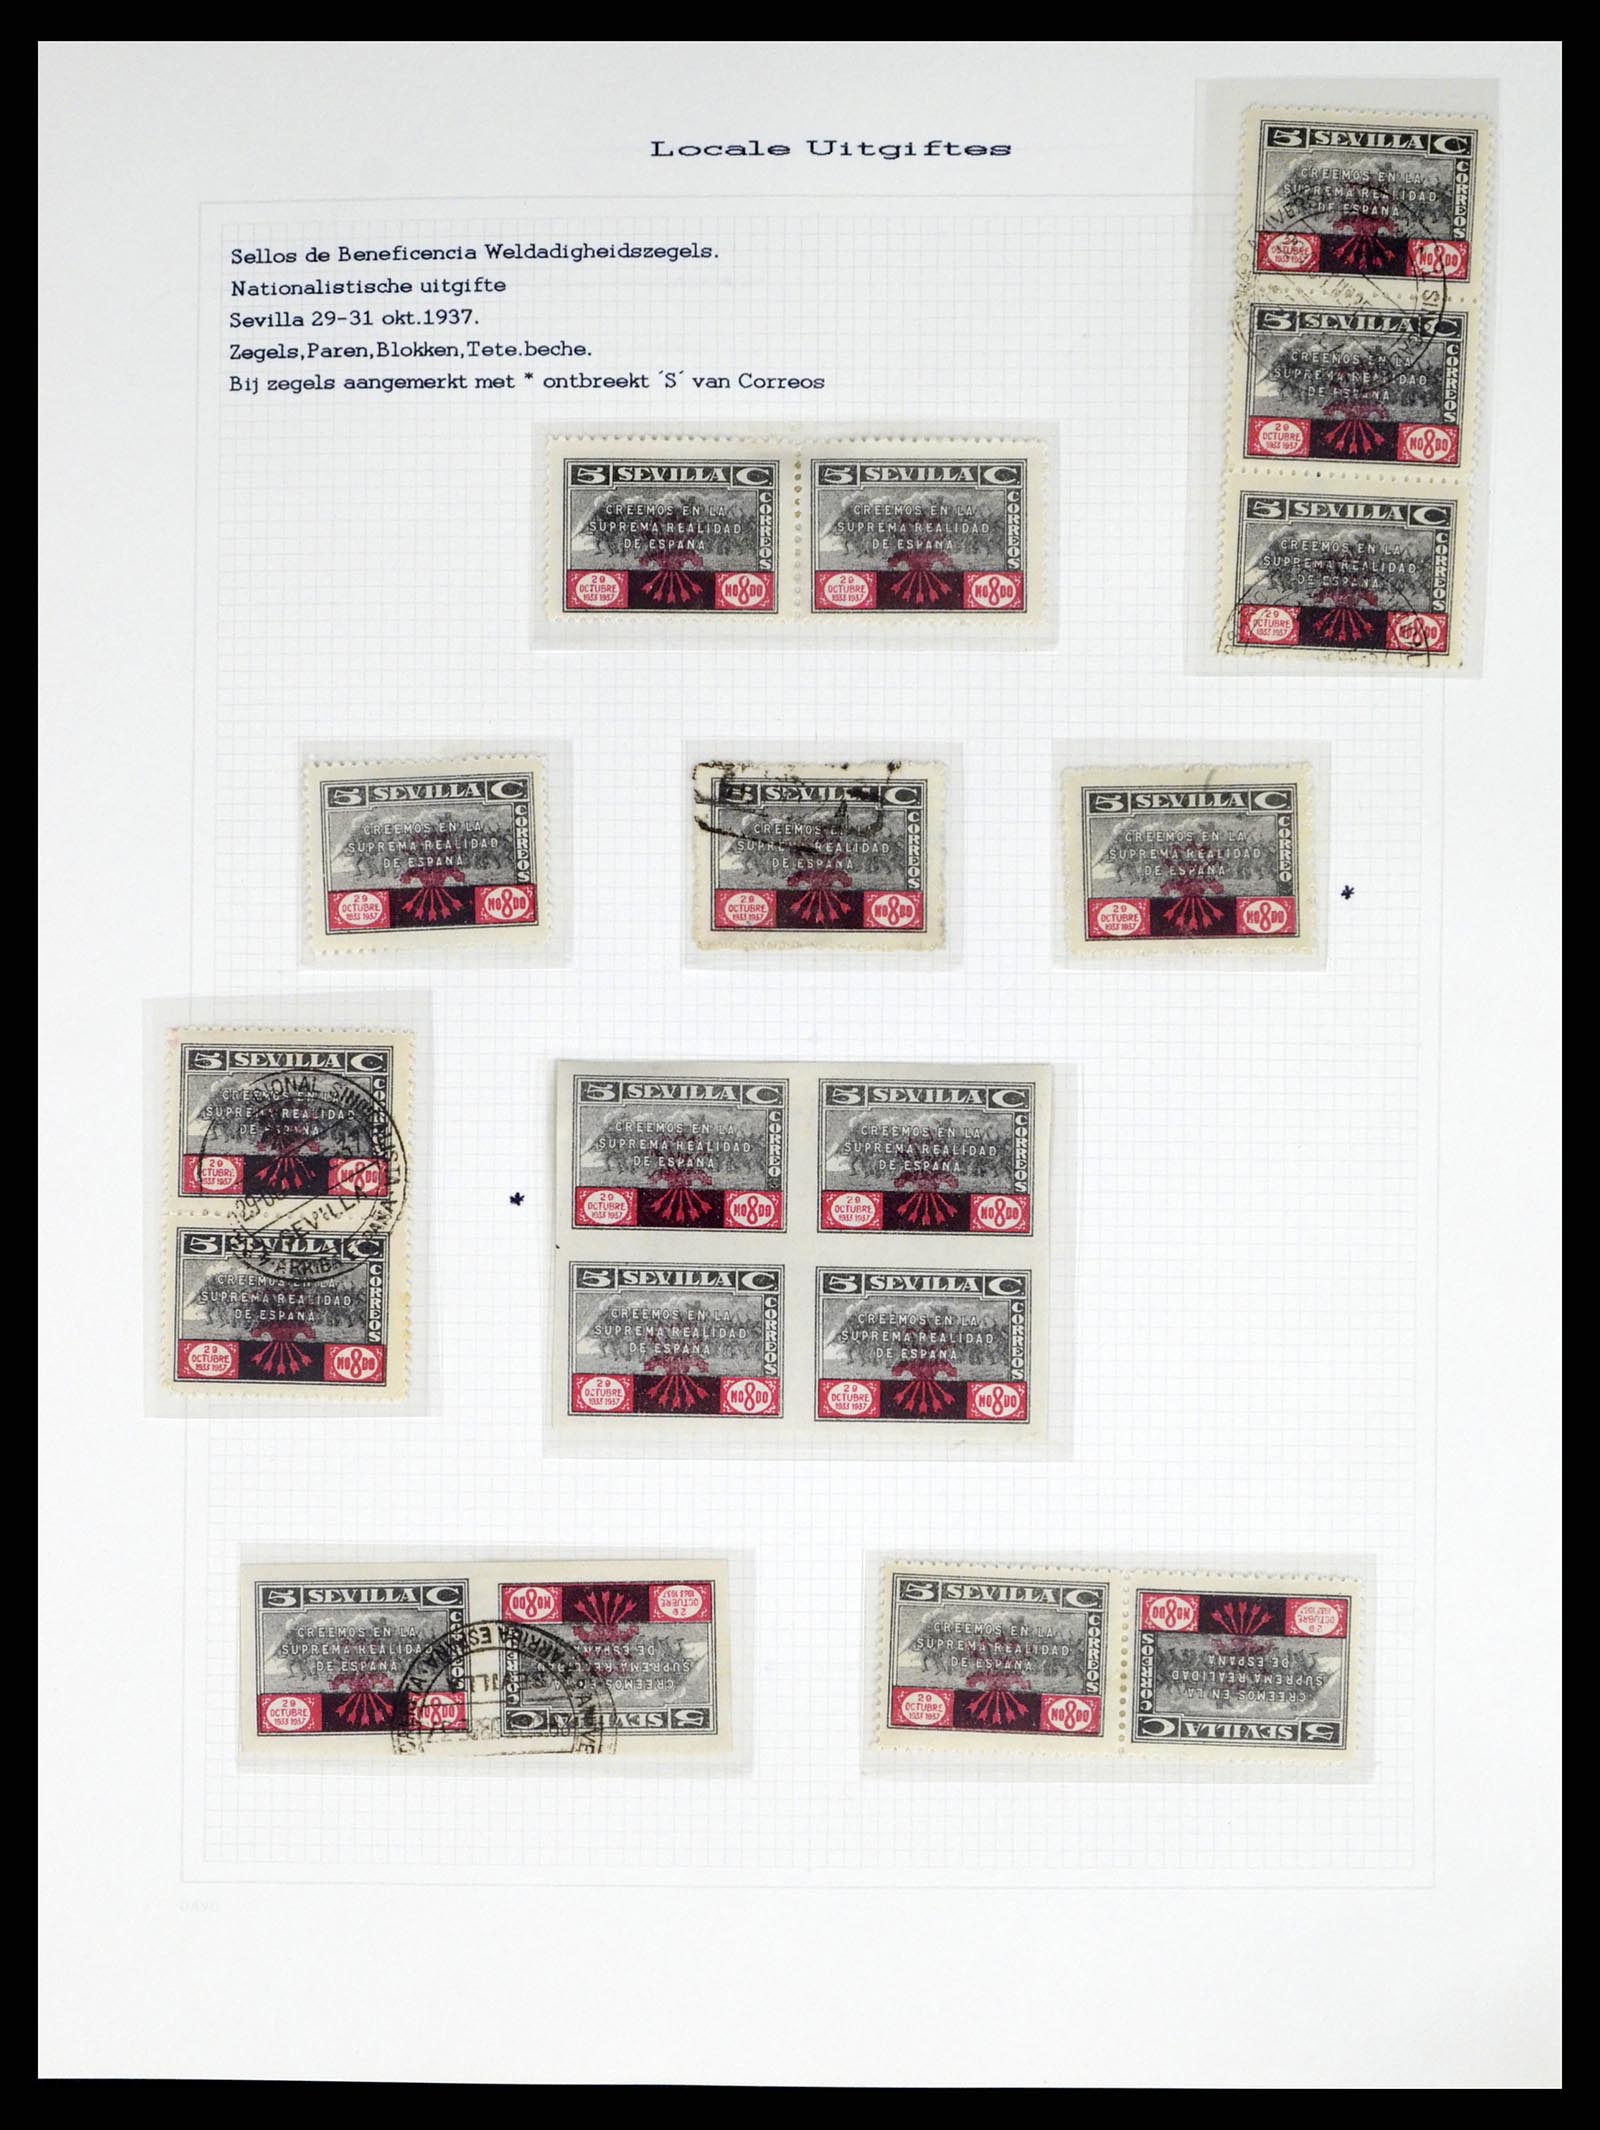 37837 093 - Stamp Collection 37837 Spansish civil war and local post 1893-1945.